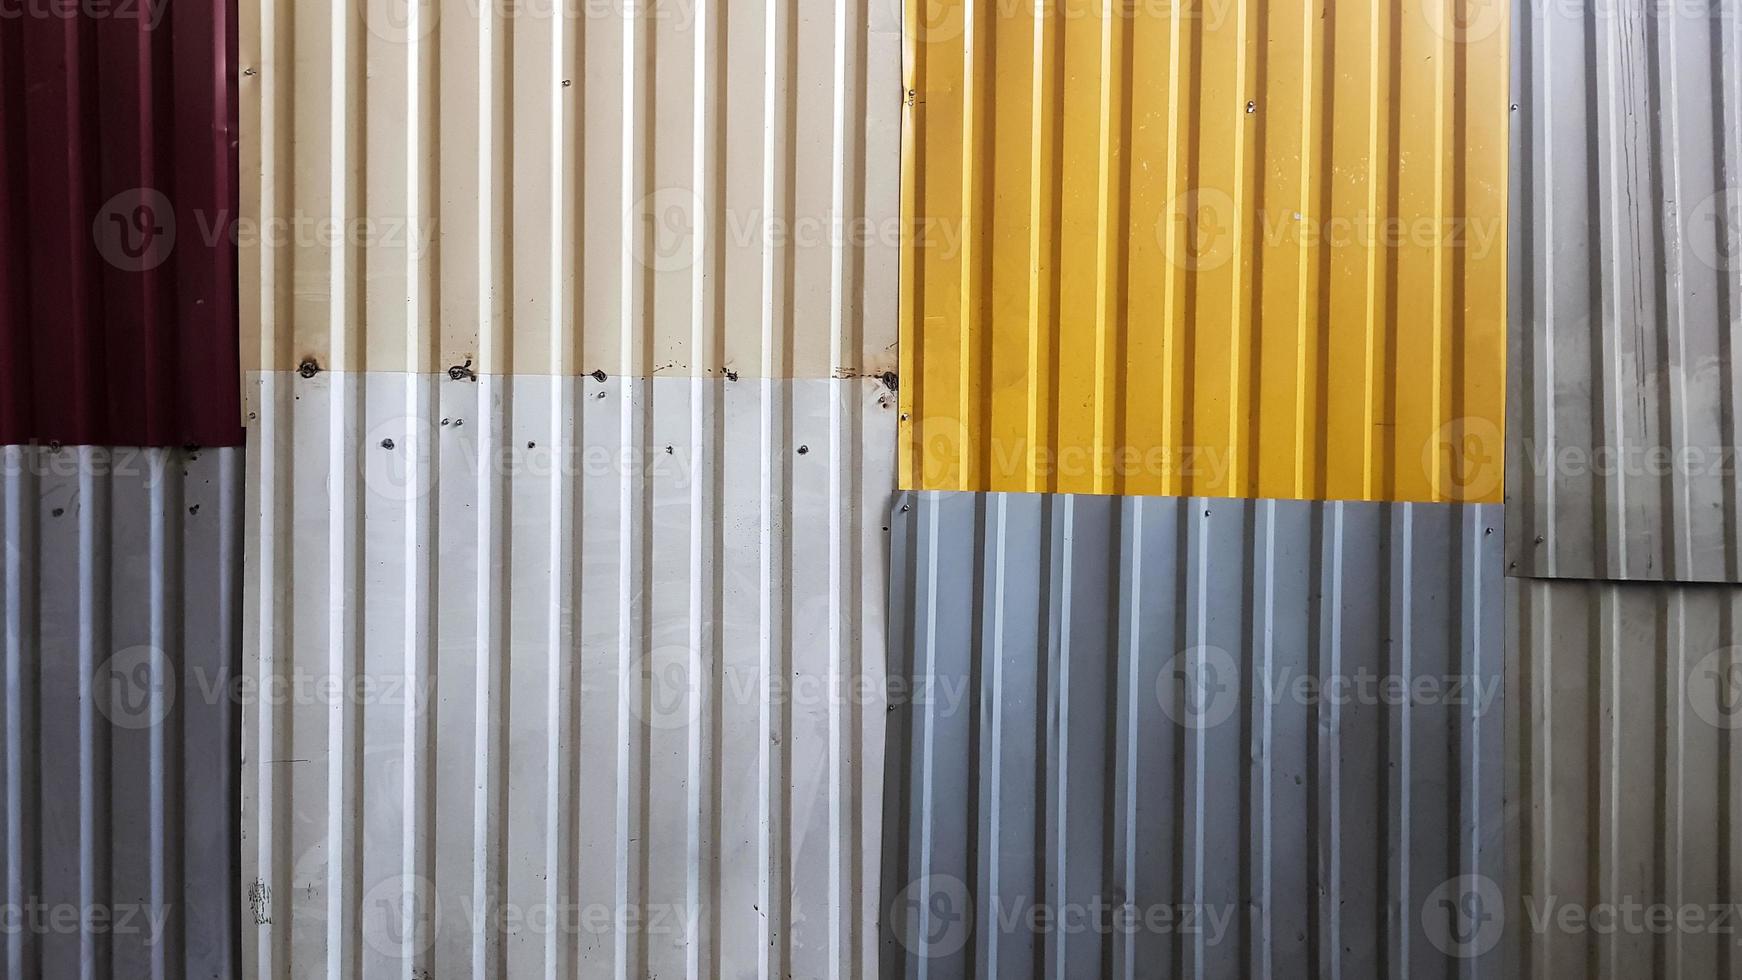 Rusty sheets of corrugated iron in different colors. Texture background of  brown, gray, yellow, green corrugated fence. Colorful galvanized sheet.  Background image of corrugated metal sheets 4542924 Stock Photo at Vecteezy